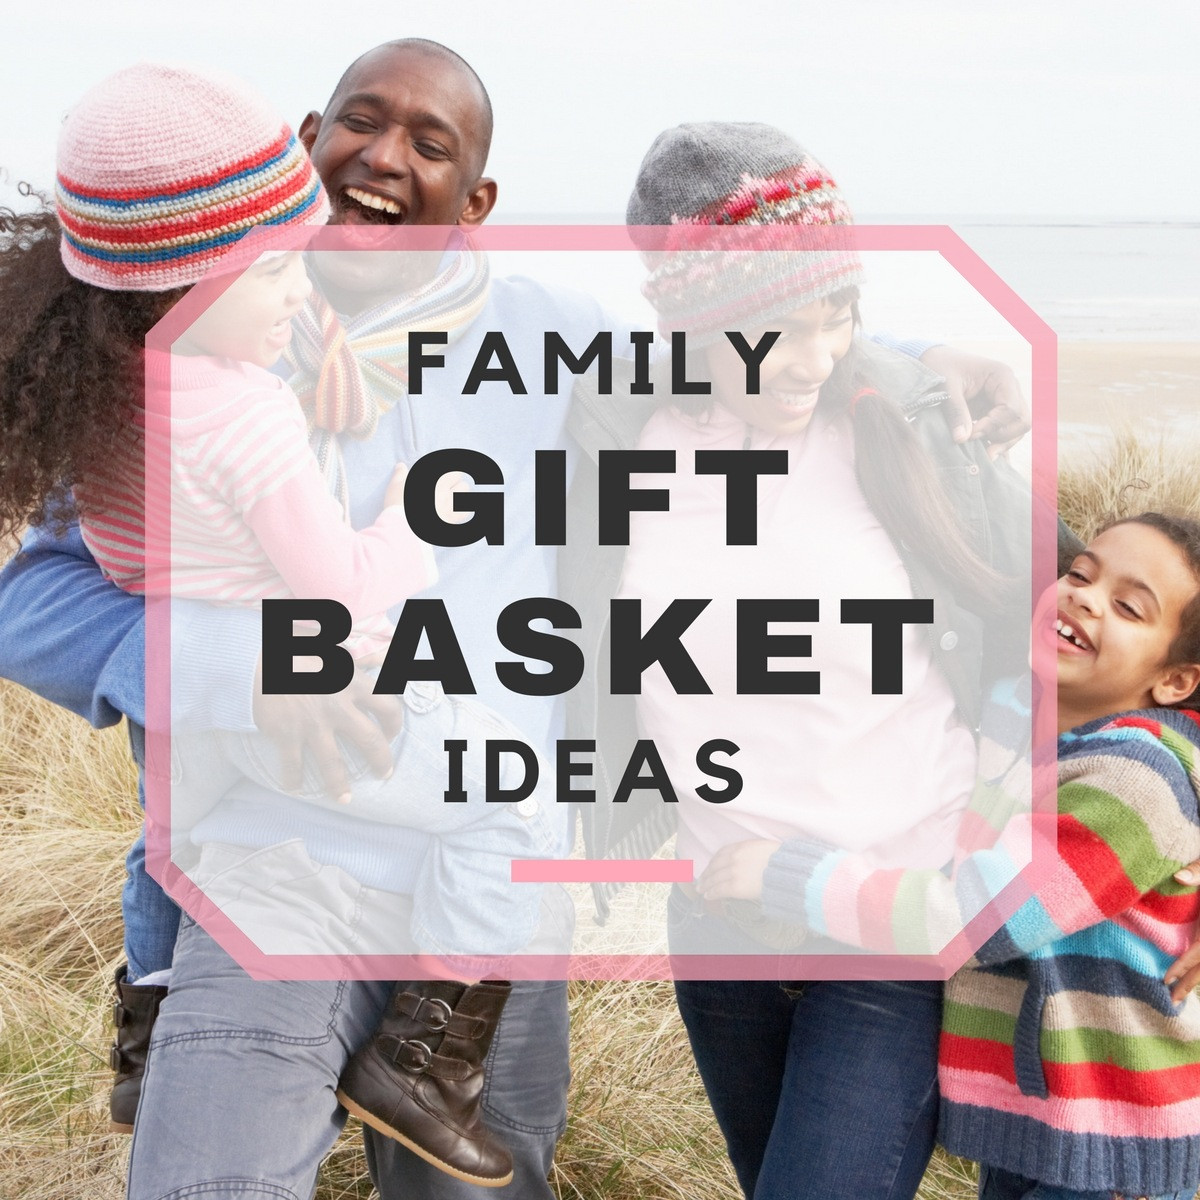 Gift Baskets Ideas For Families
 10 Best Family Gift Basket Ideas